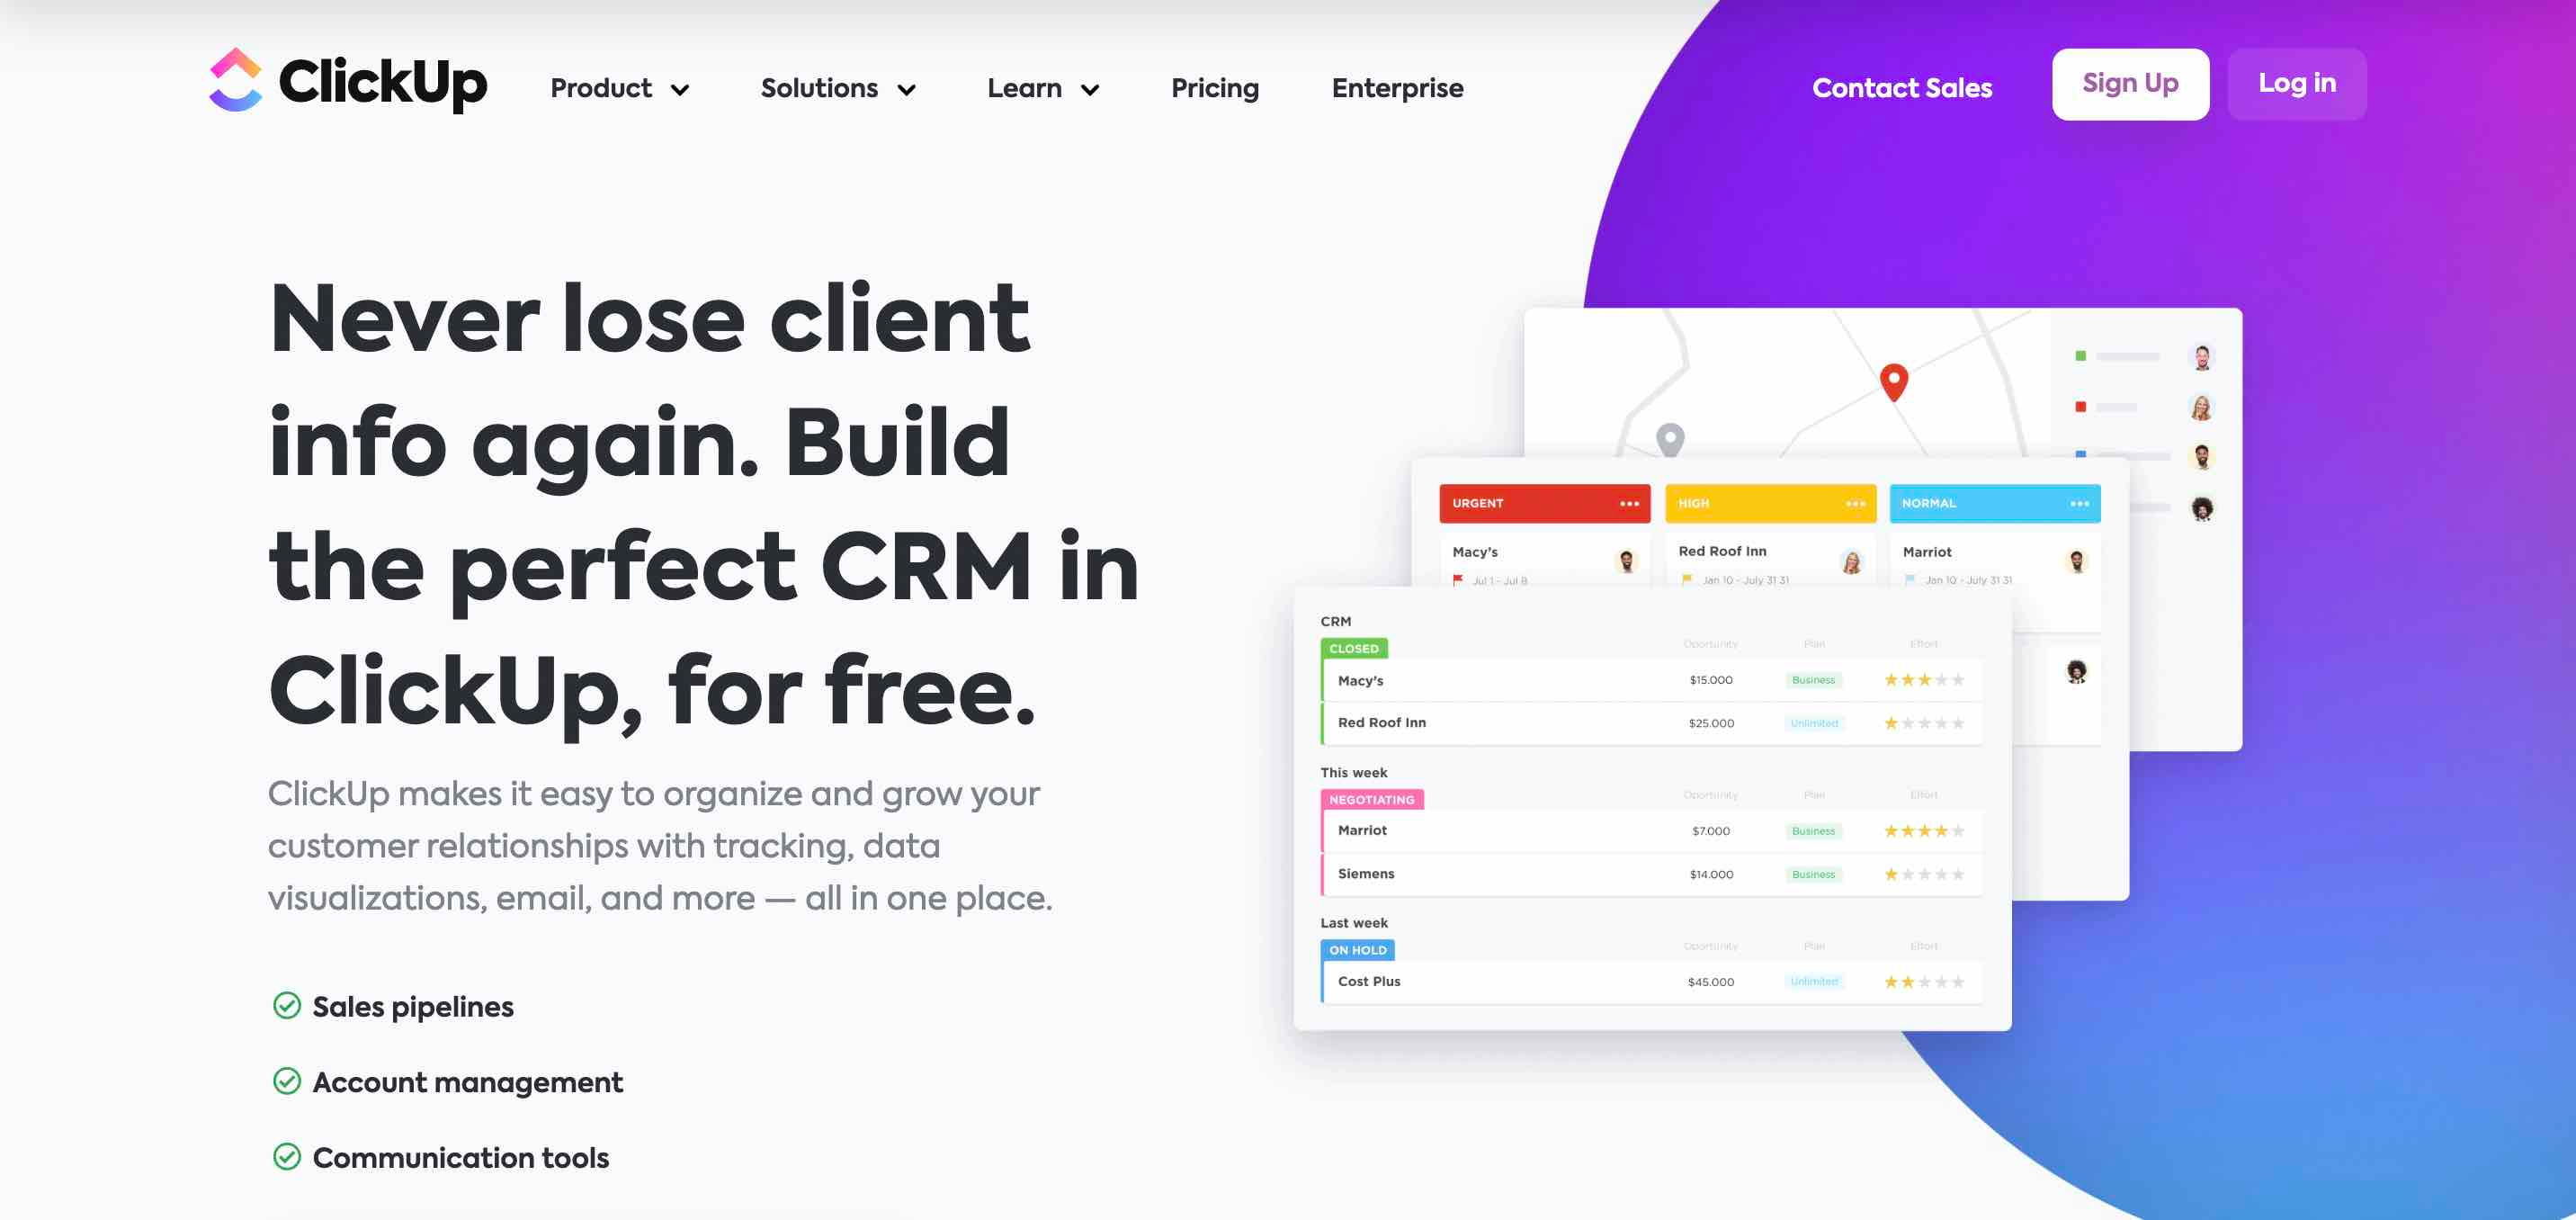 Clickup CRM features